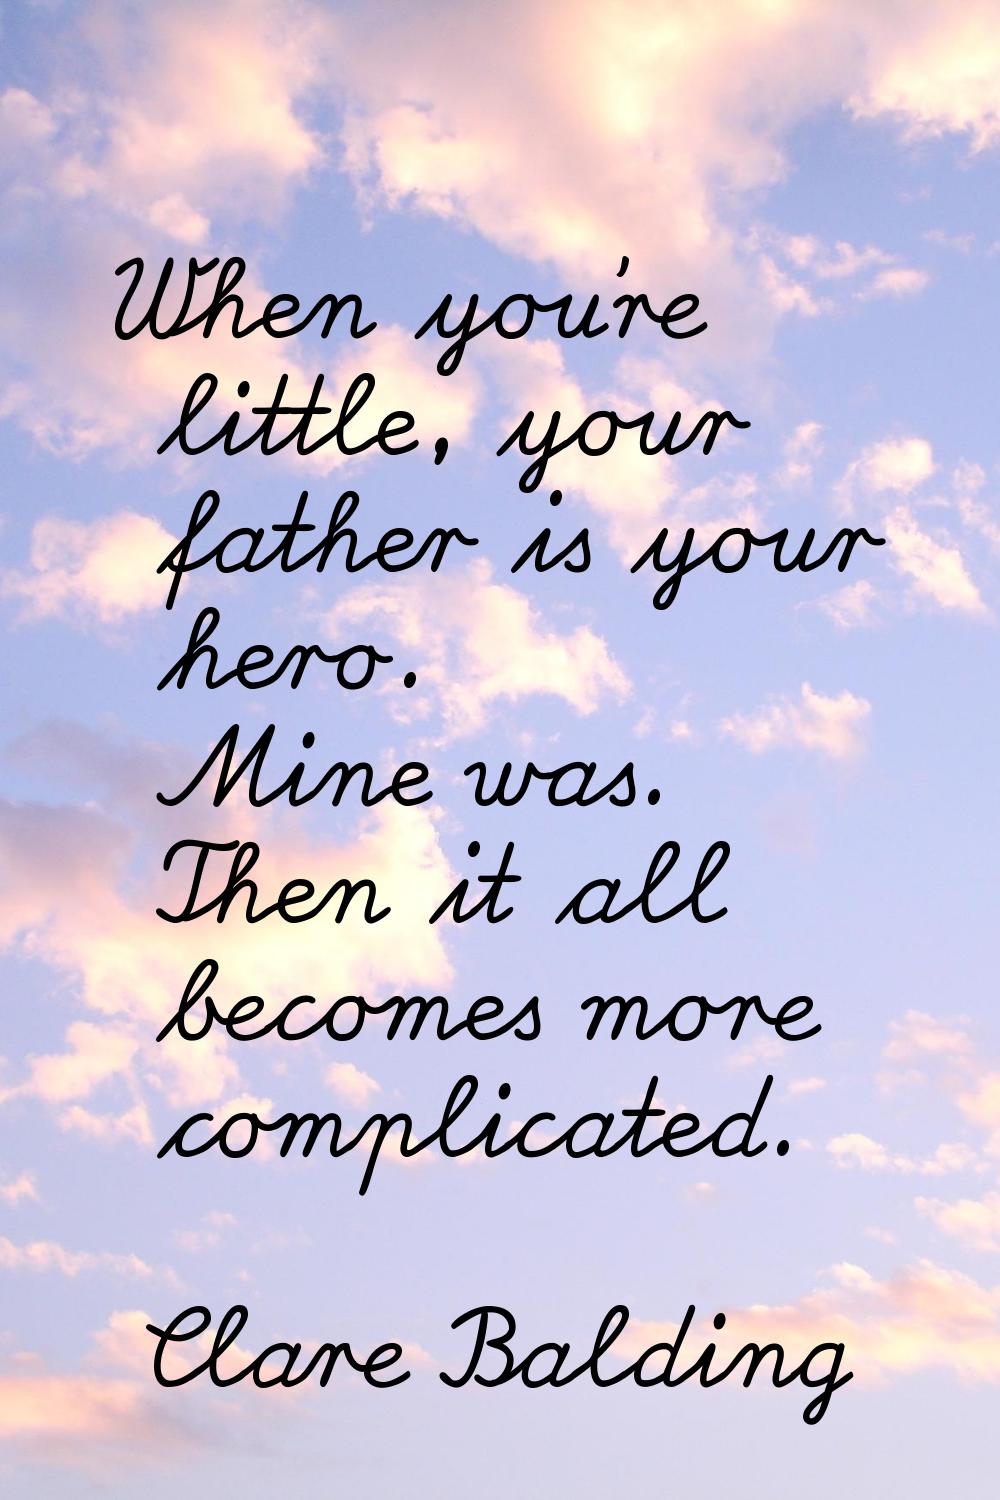 When you're little, your father is your hero. Mine was. Then it all becomes more complicated.